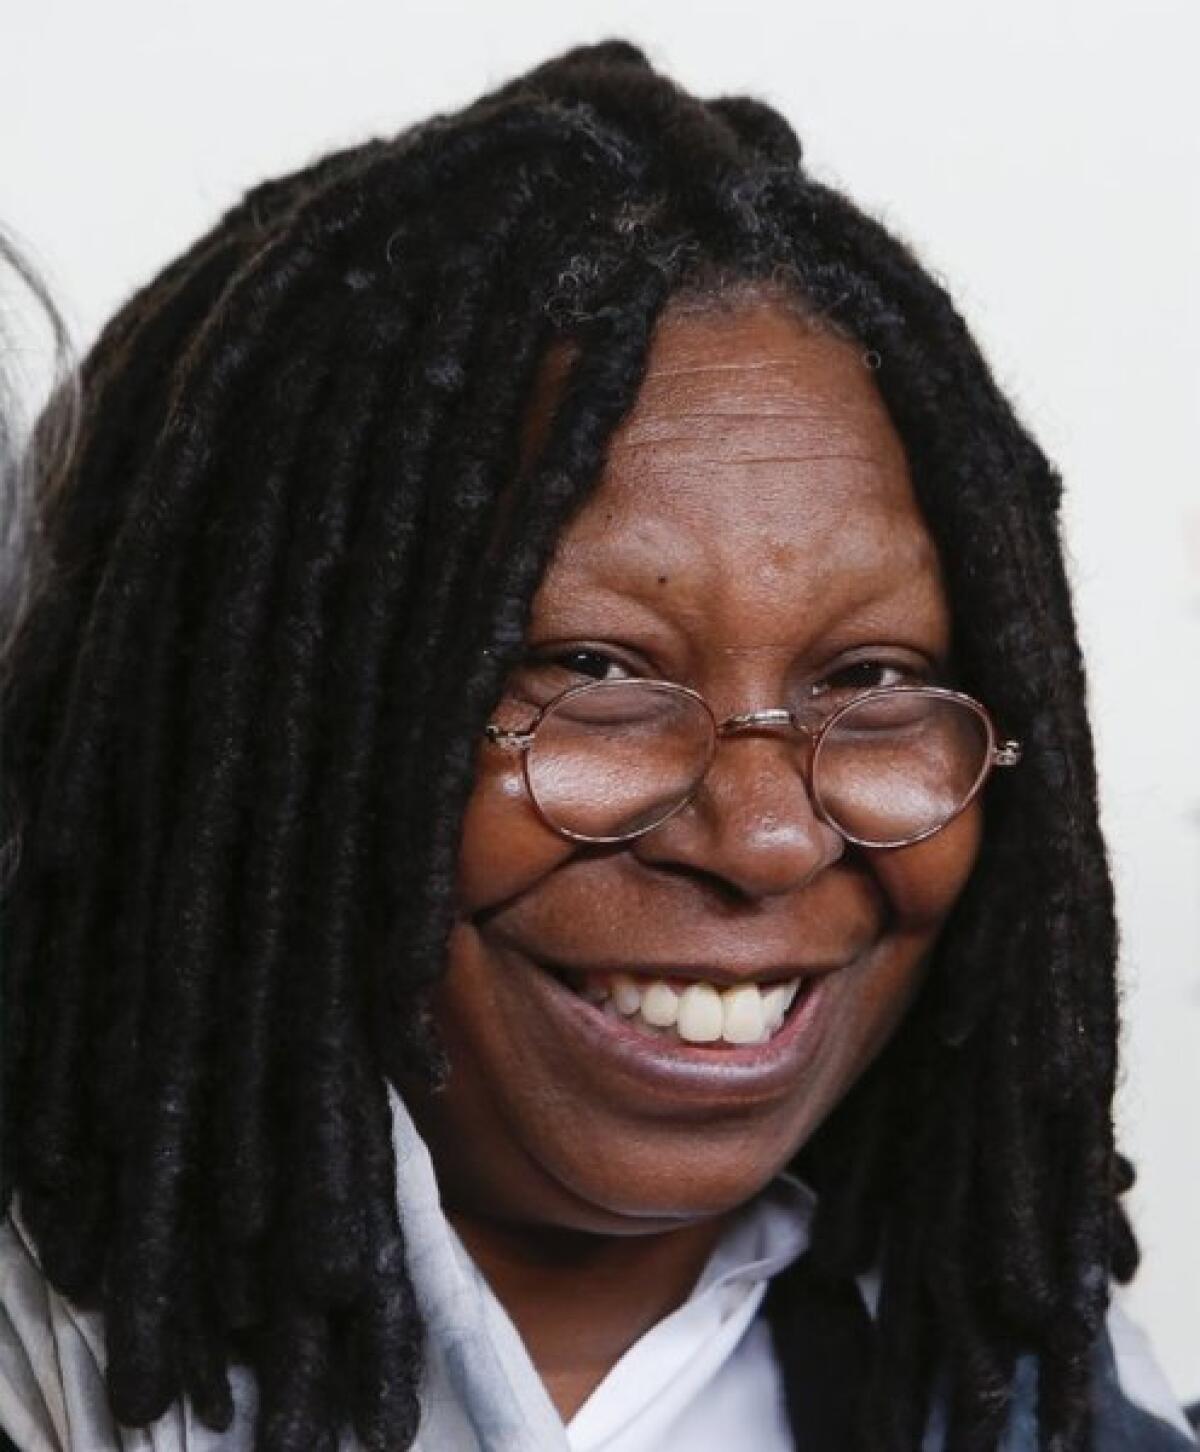 Whoopi Goldberg says "Saturday Night Live" has had a casting diversity problem for years.